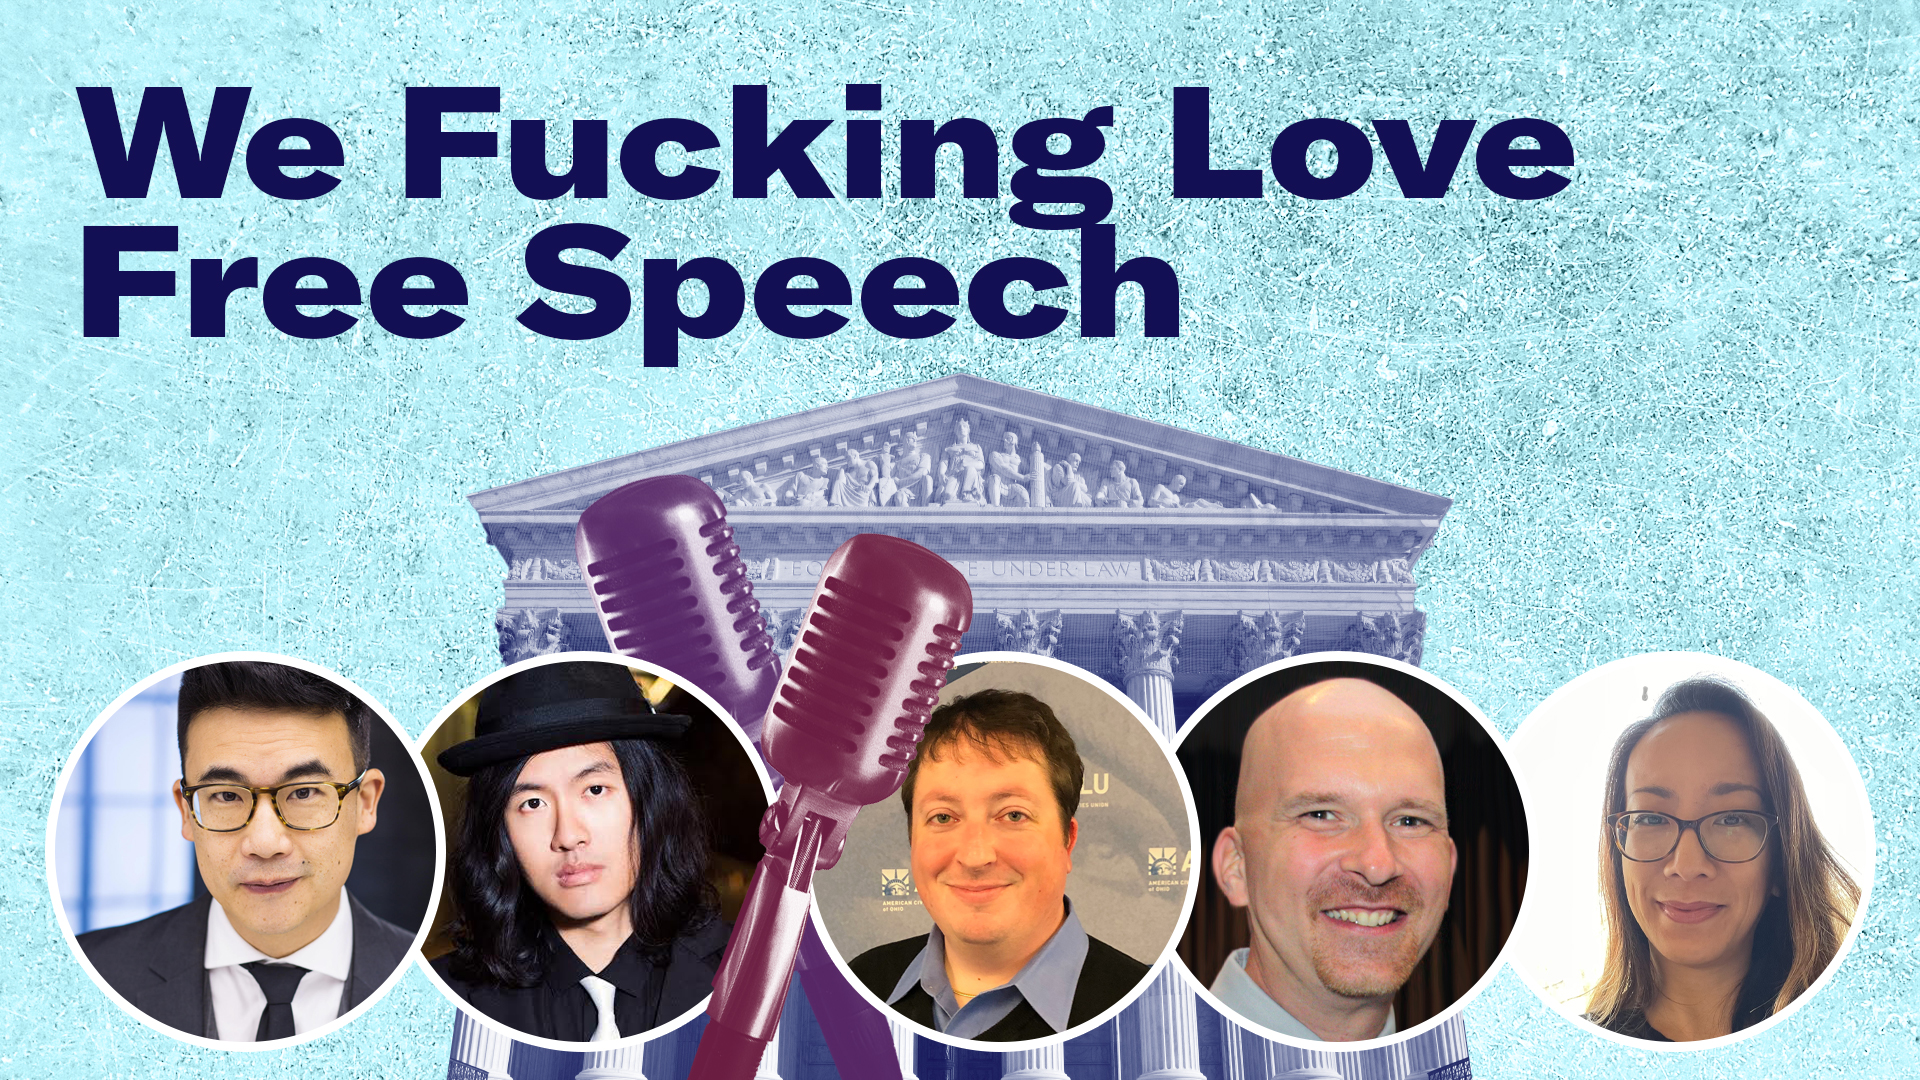 Headshots in circles of all the panelists for the event in a collage containing a blue U.S. Supreme Court, and maroon and purple microphones and the words 'We Fucking Love Free Speech' in navy on a grunge textured azure background